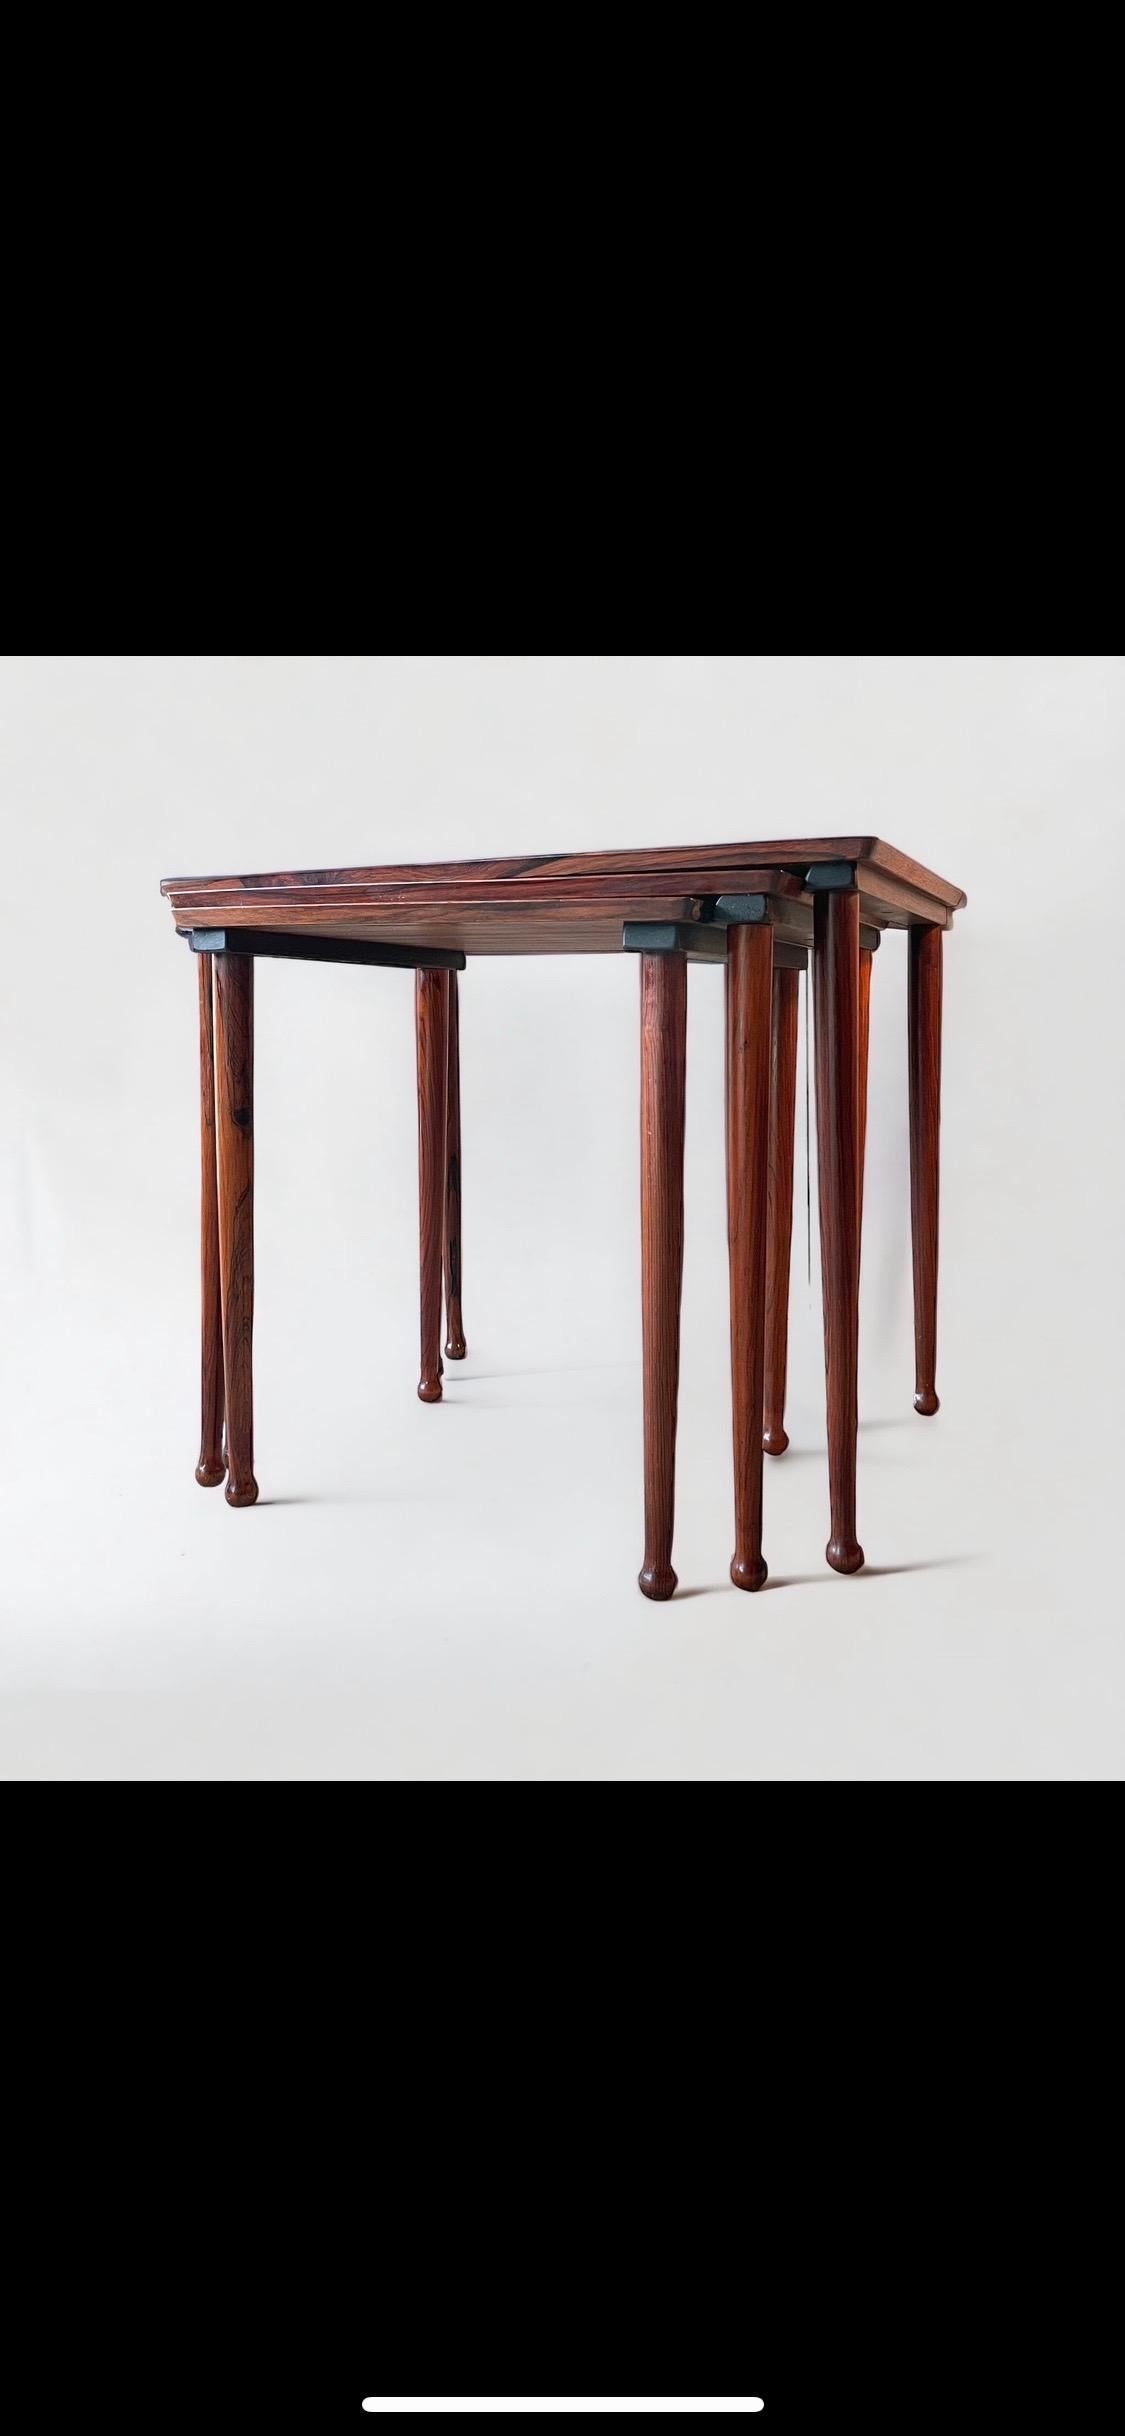 Amazing and Rare nesting tables with drumstick legs by Jørgen Aakjær Jørgensen. Denmark 1960s

H 47, 55 x 44 cm.
Produced by Møbelintasia, Bramming.